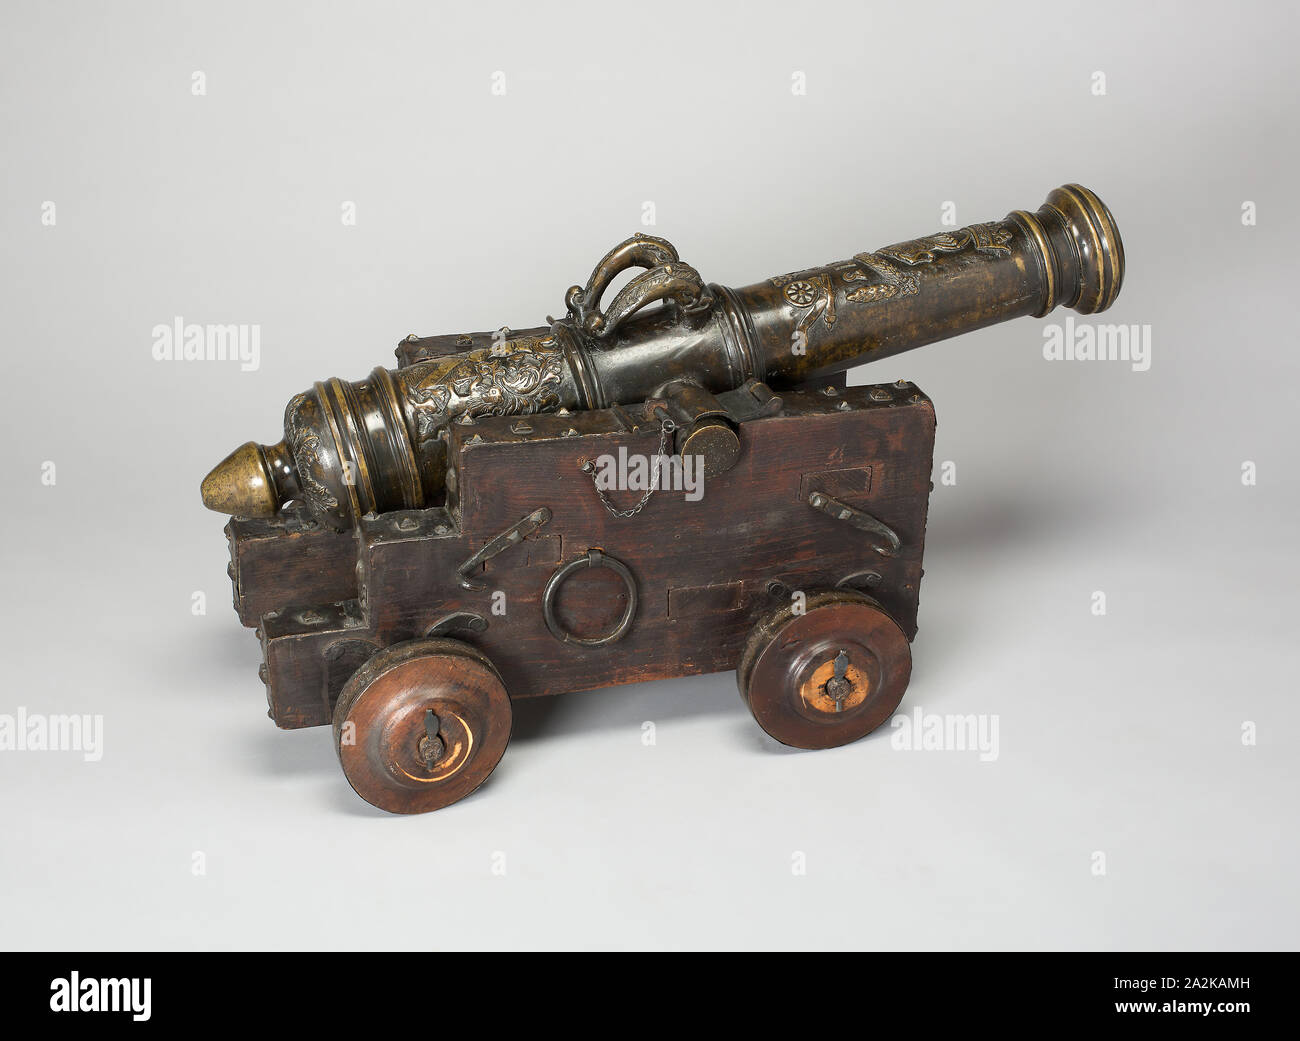 Naval Gun with Carriage, 1673, European, Europe, Bronze, Length overall of cannon: 37 in. (94 cm Stock Photo